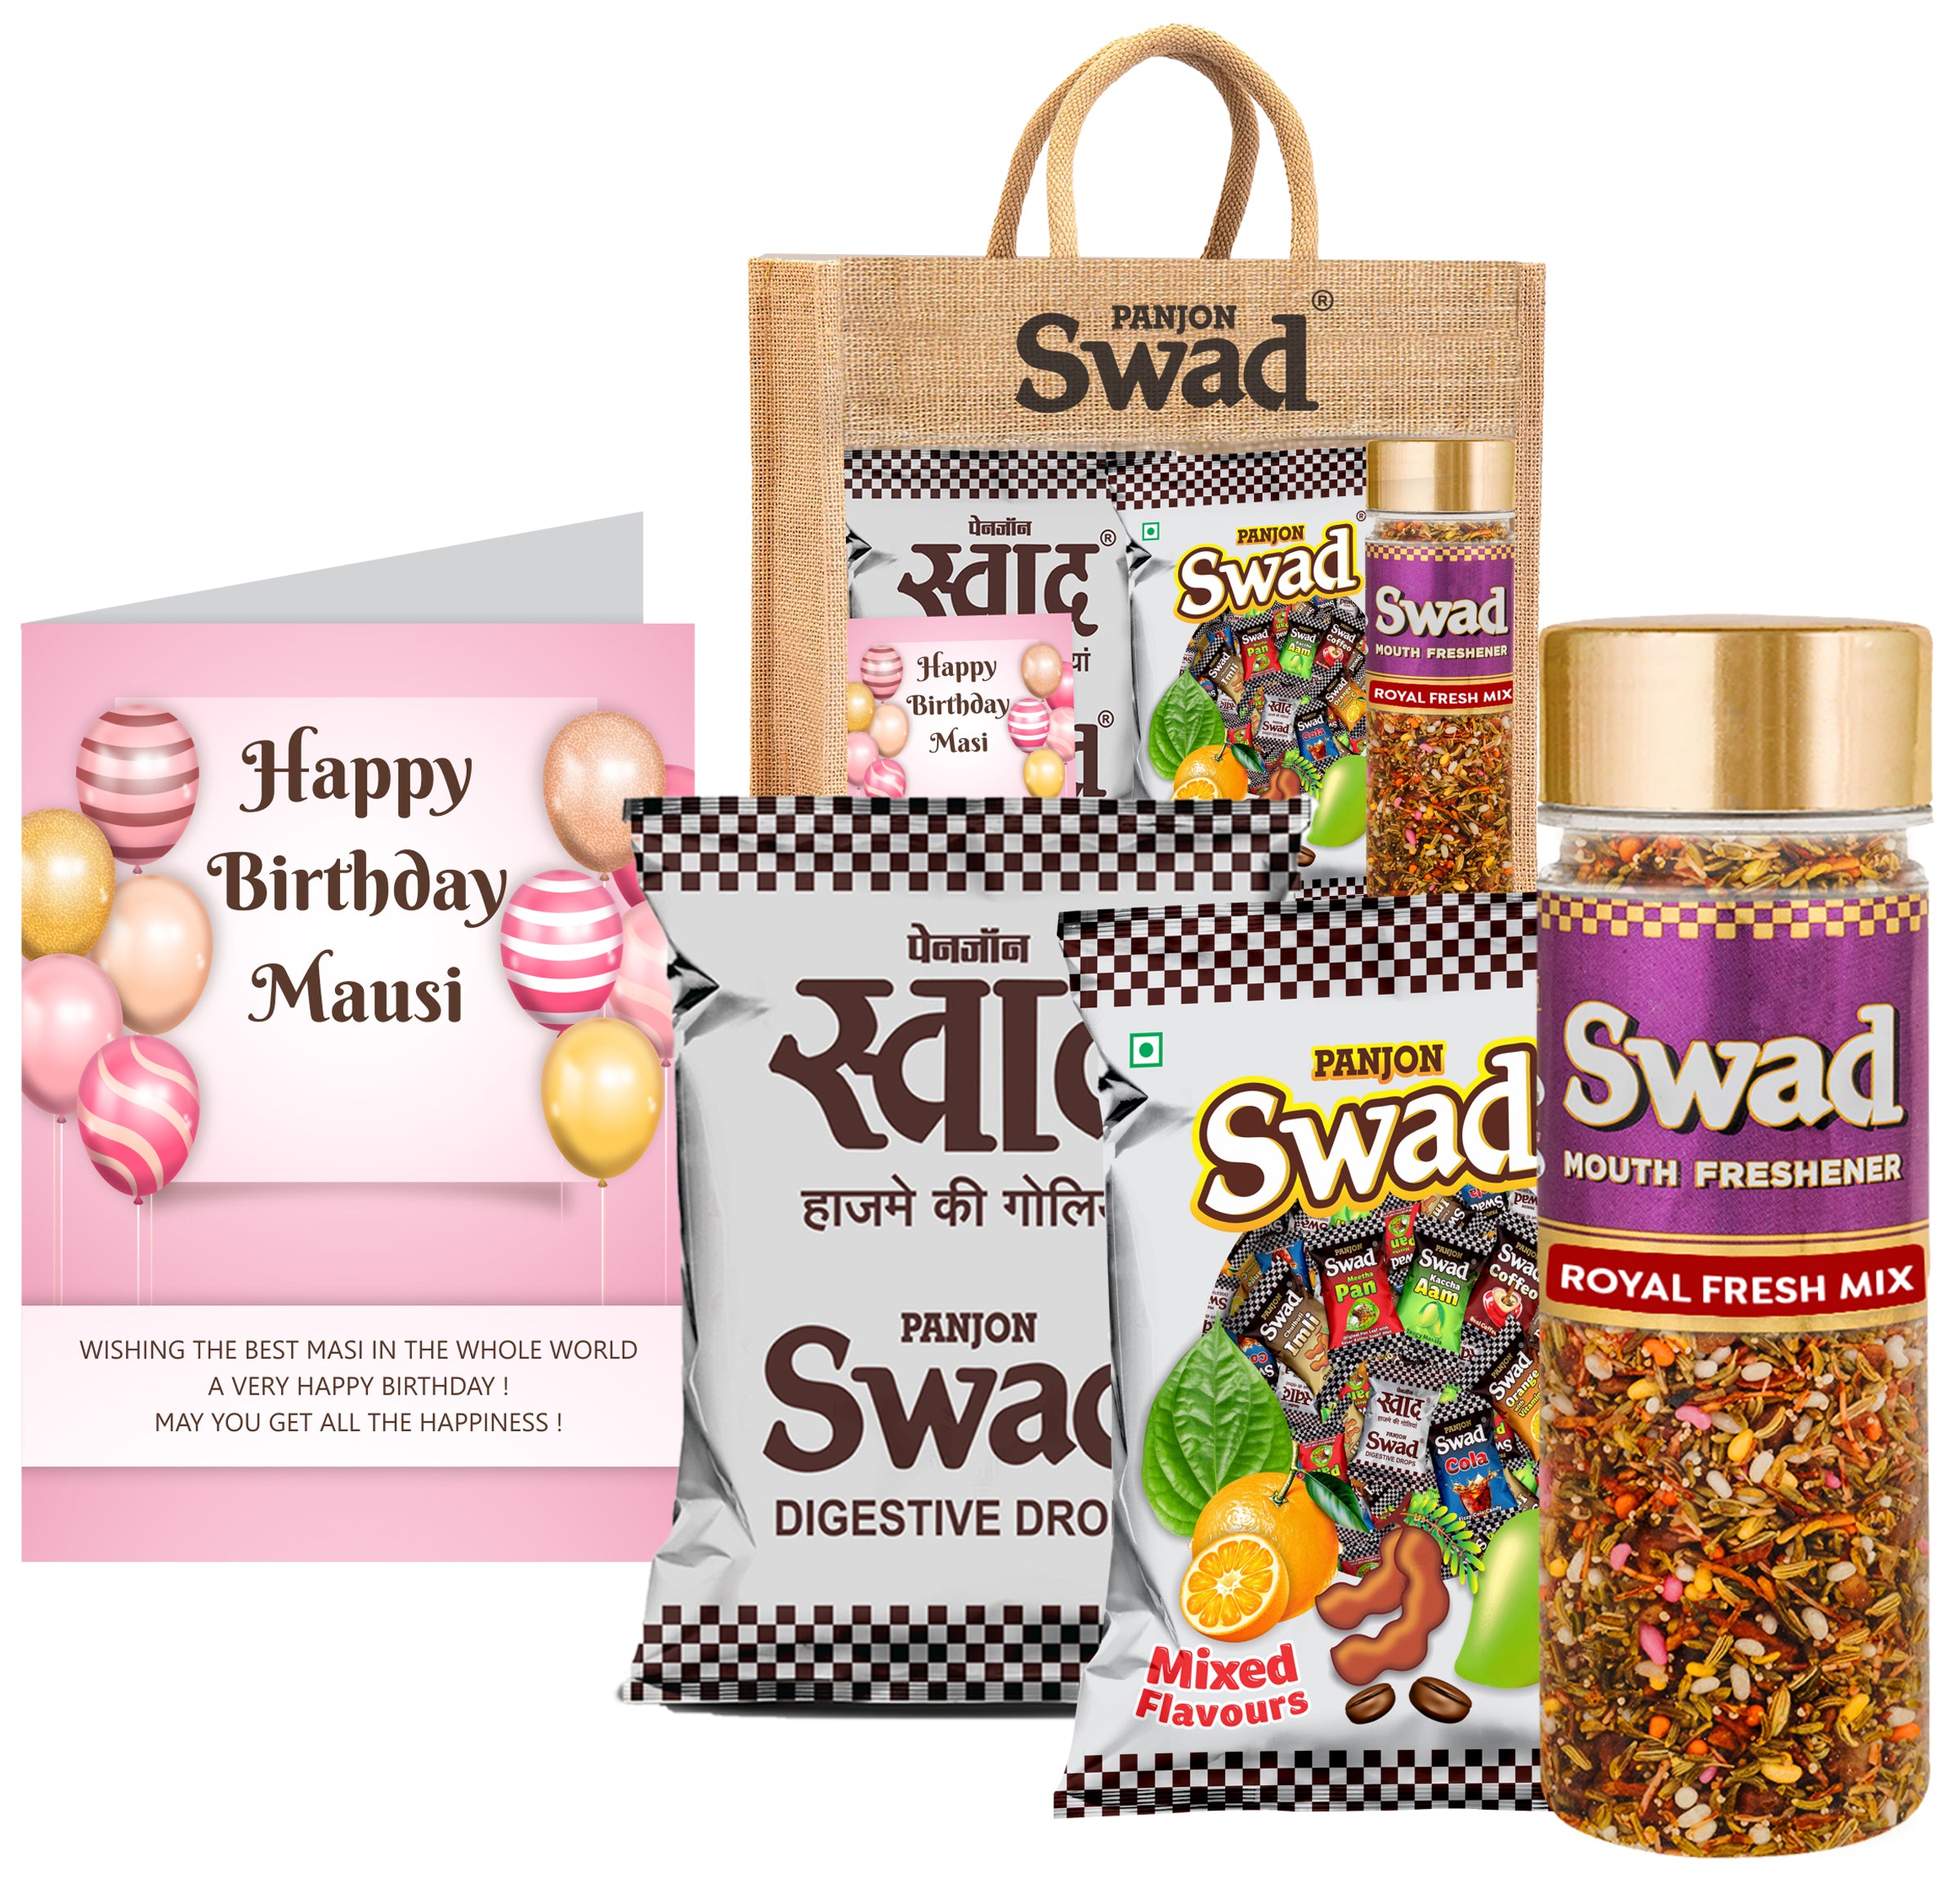 Swad Happy Birthday Masi/Mausi Gift with Card (25 Swad Candy, 25 Mixed Toffee, Royal Fresh Mix Mukhwas) in Jute Bag